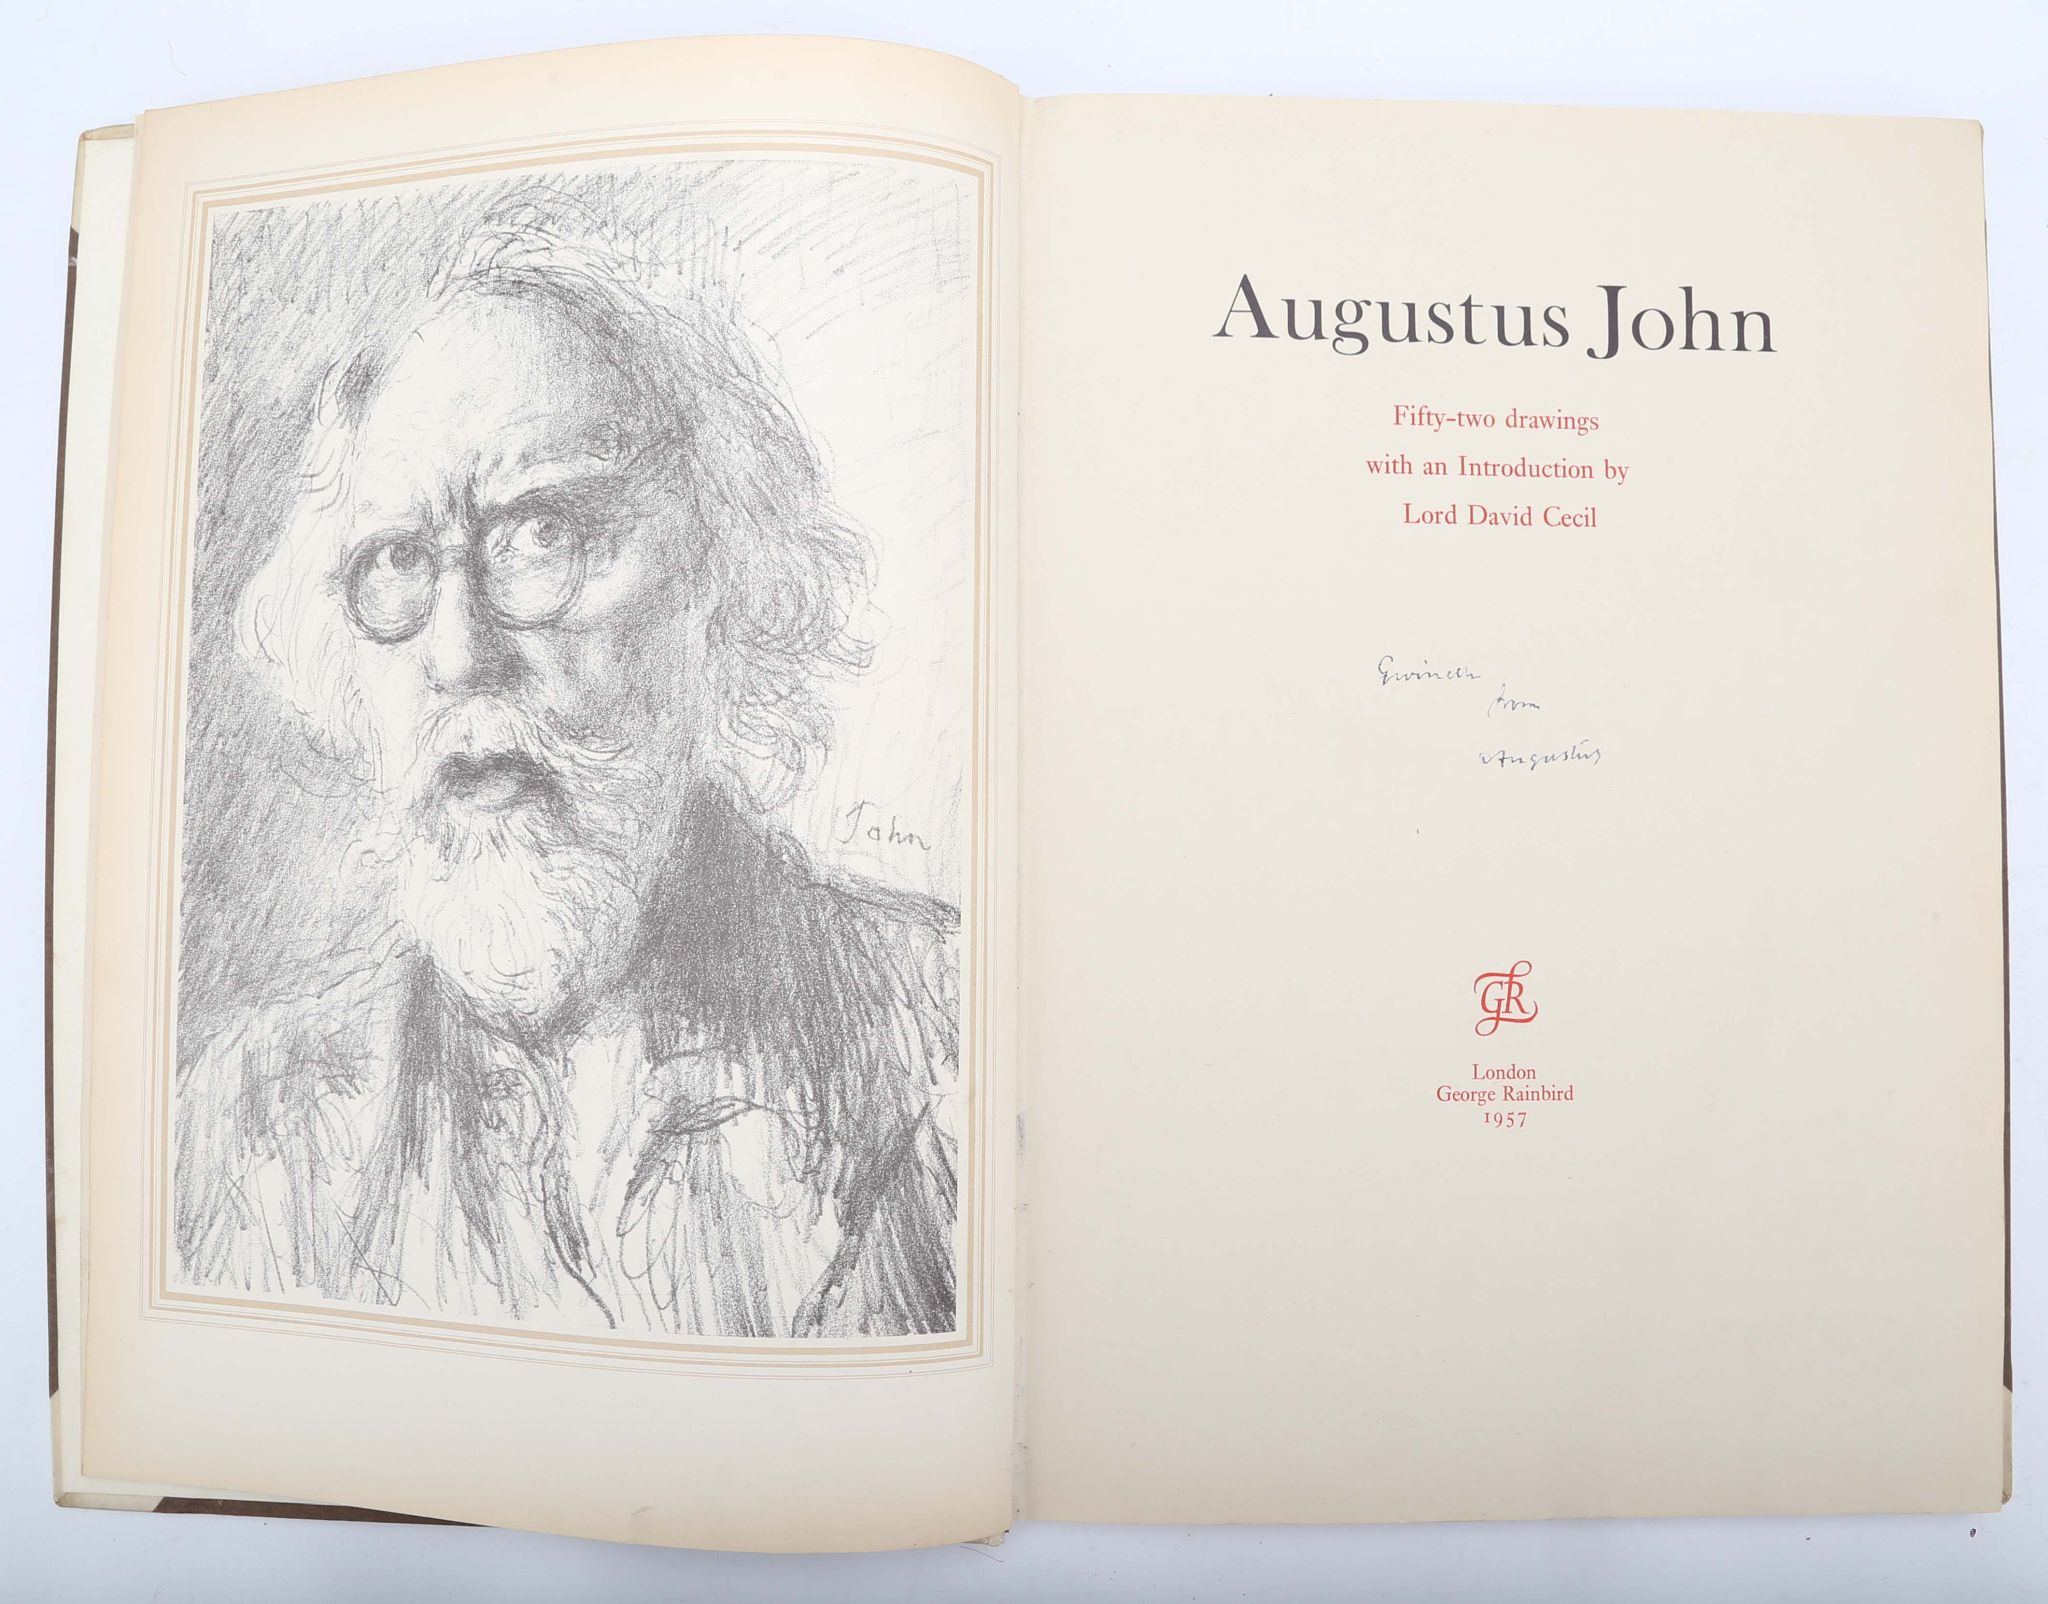 JOHN, Augustus (1878-1961). Augustus John. Fifty-two drawings with an Introduction by Lord David